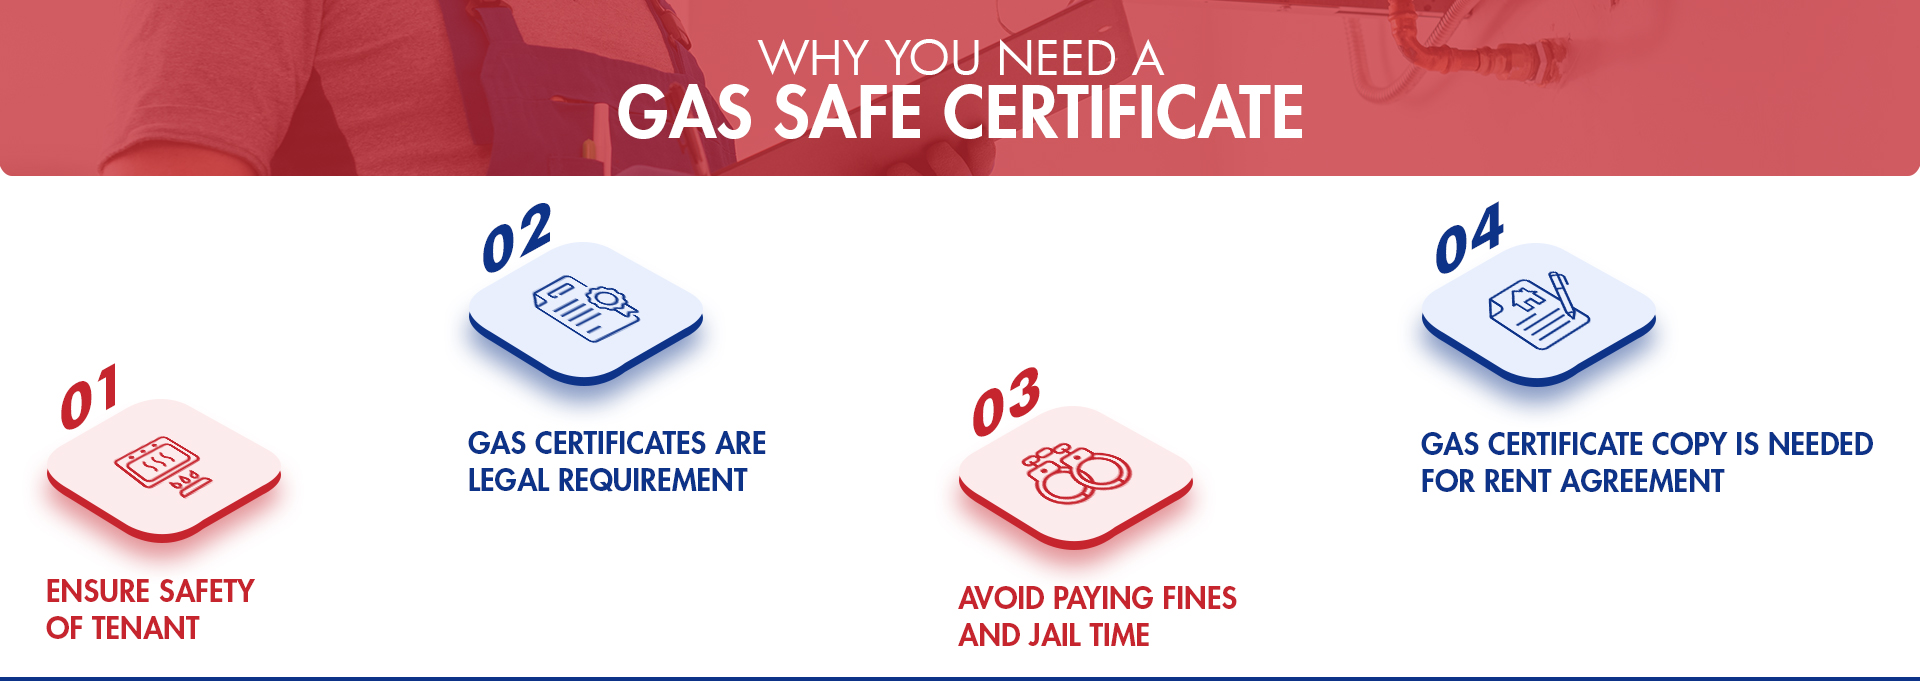 Why you need a Gas Safe certificate